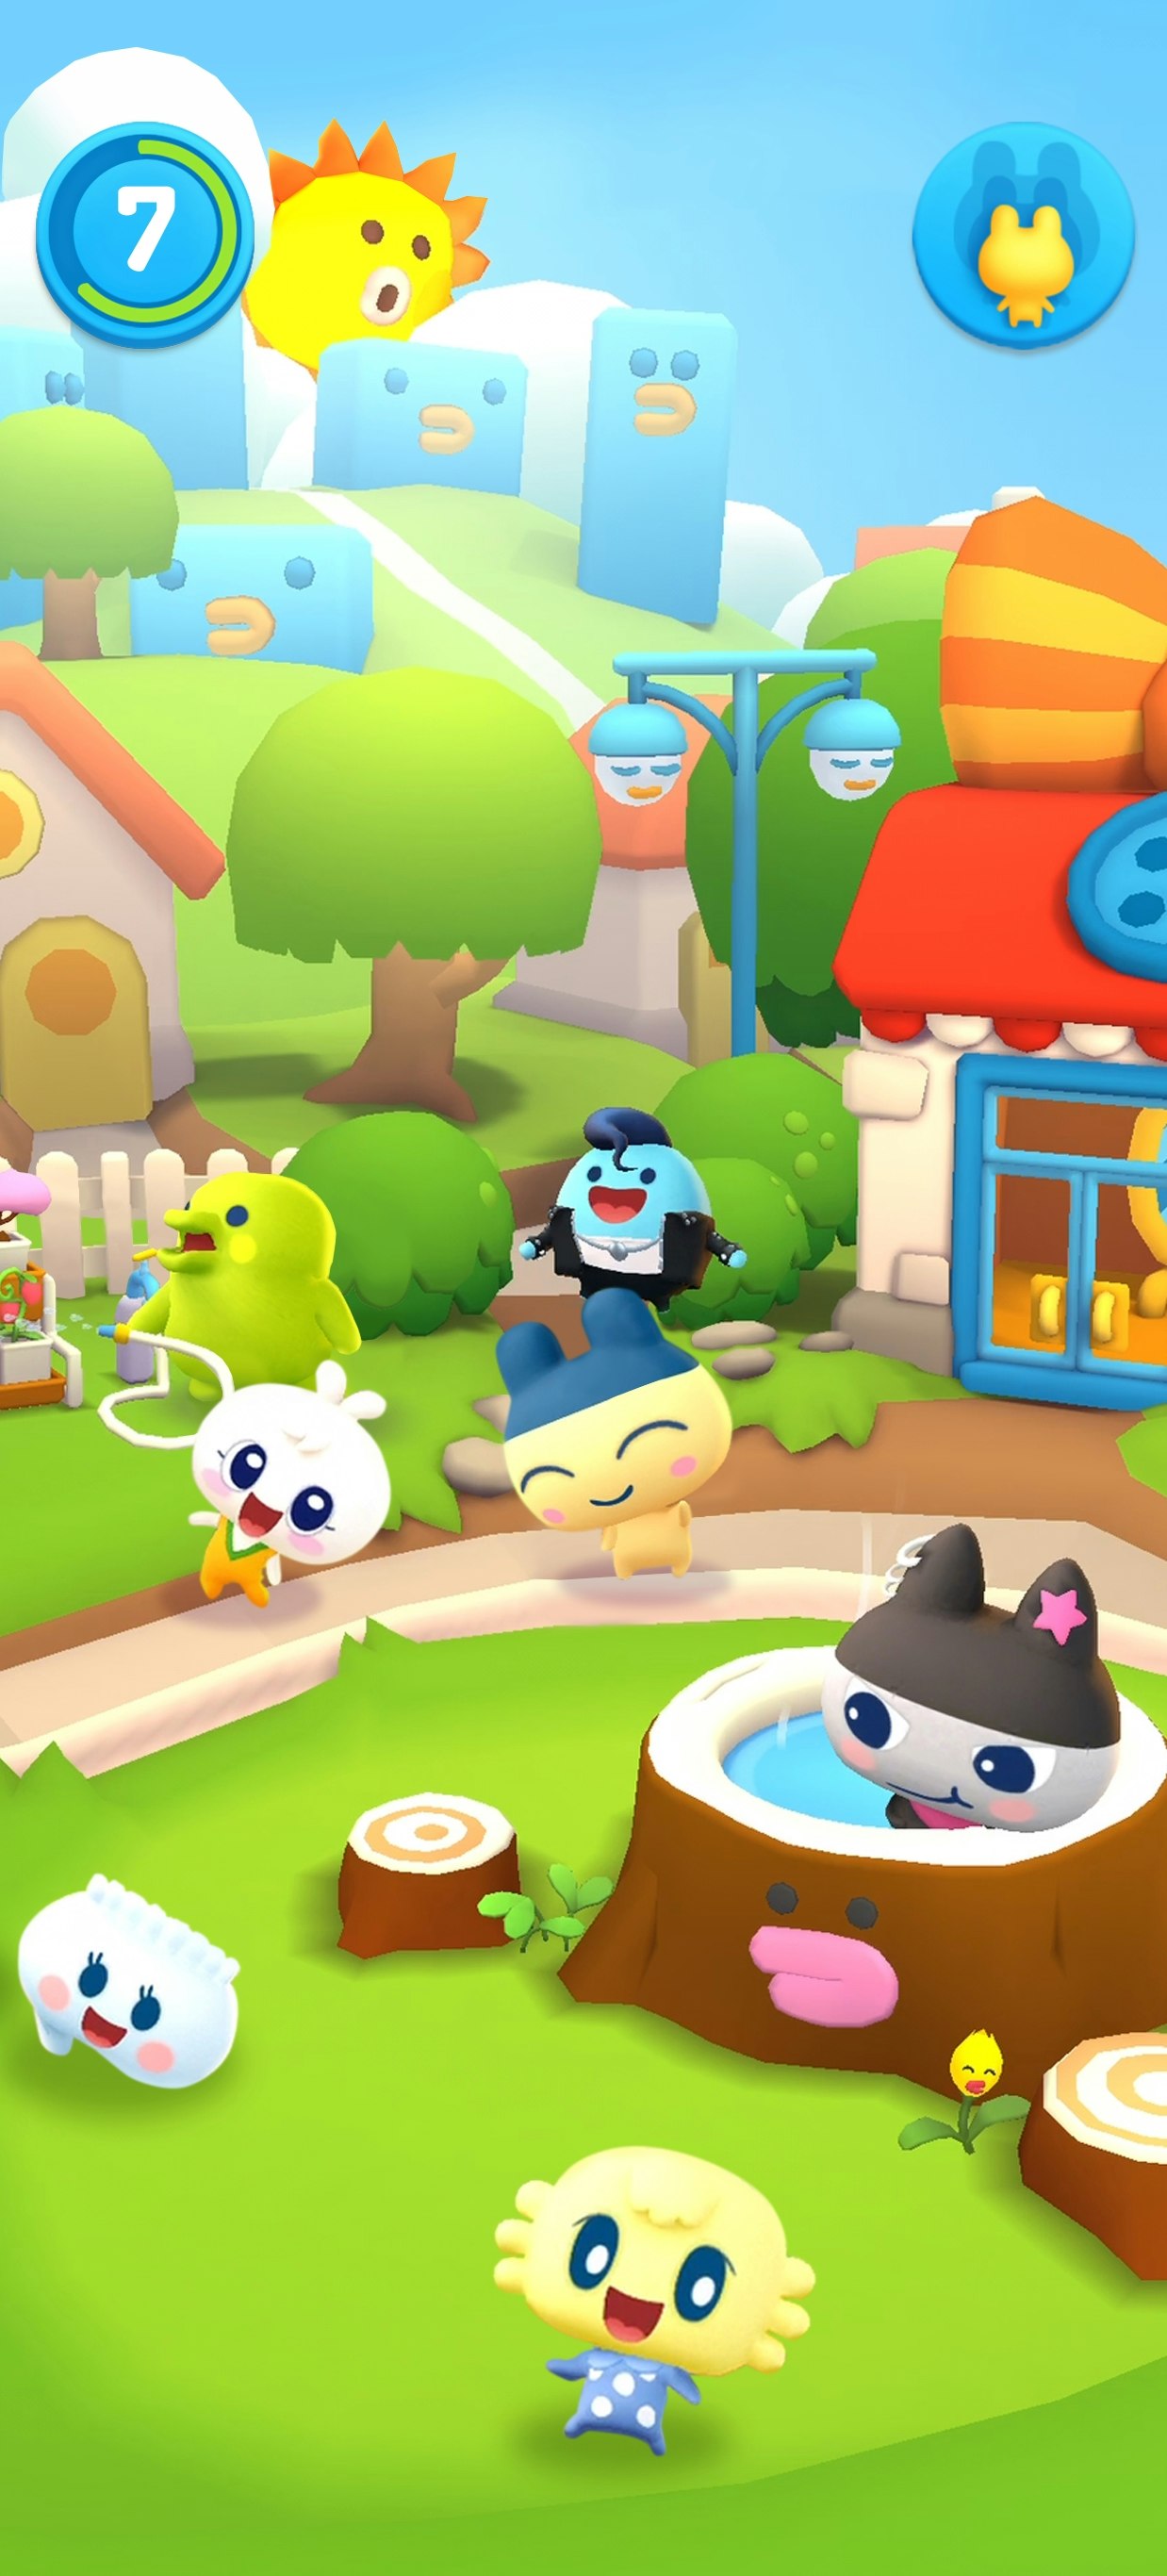 My Tamagotchi Forever – Apps no Google Play